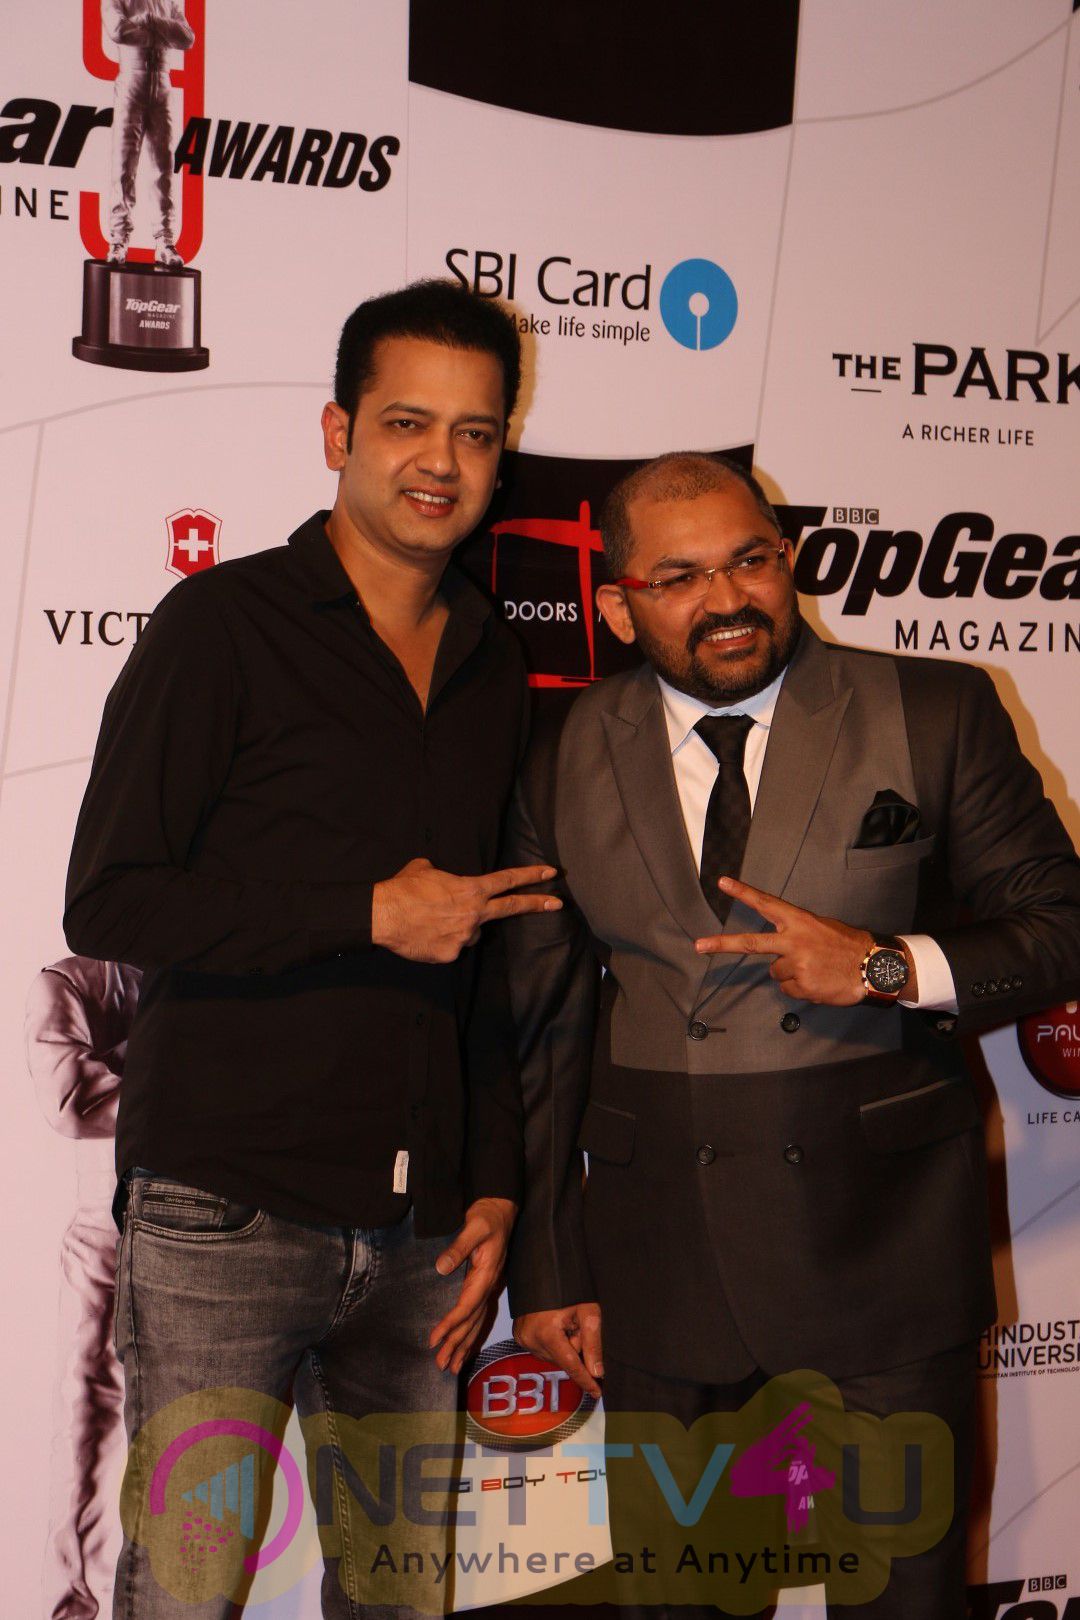 9th Edition Of Top Gear Magazine Awards With Many Celebs Photos Hindi Gallery